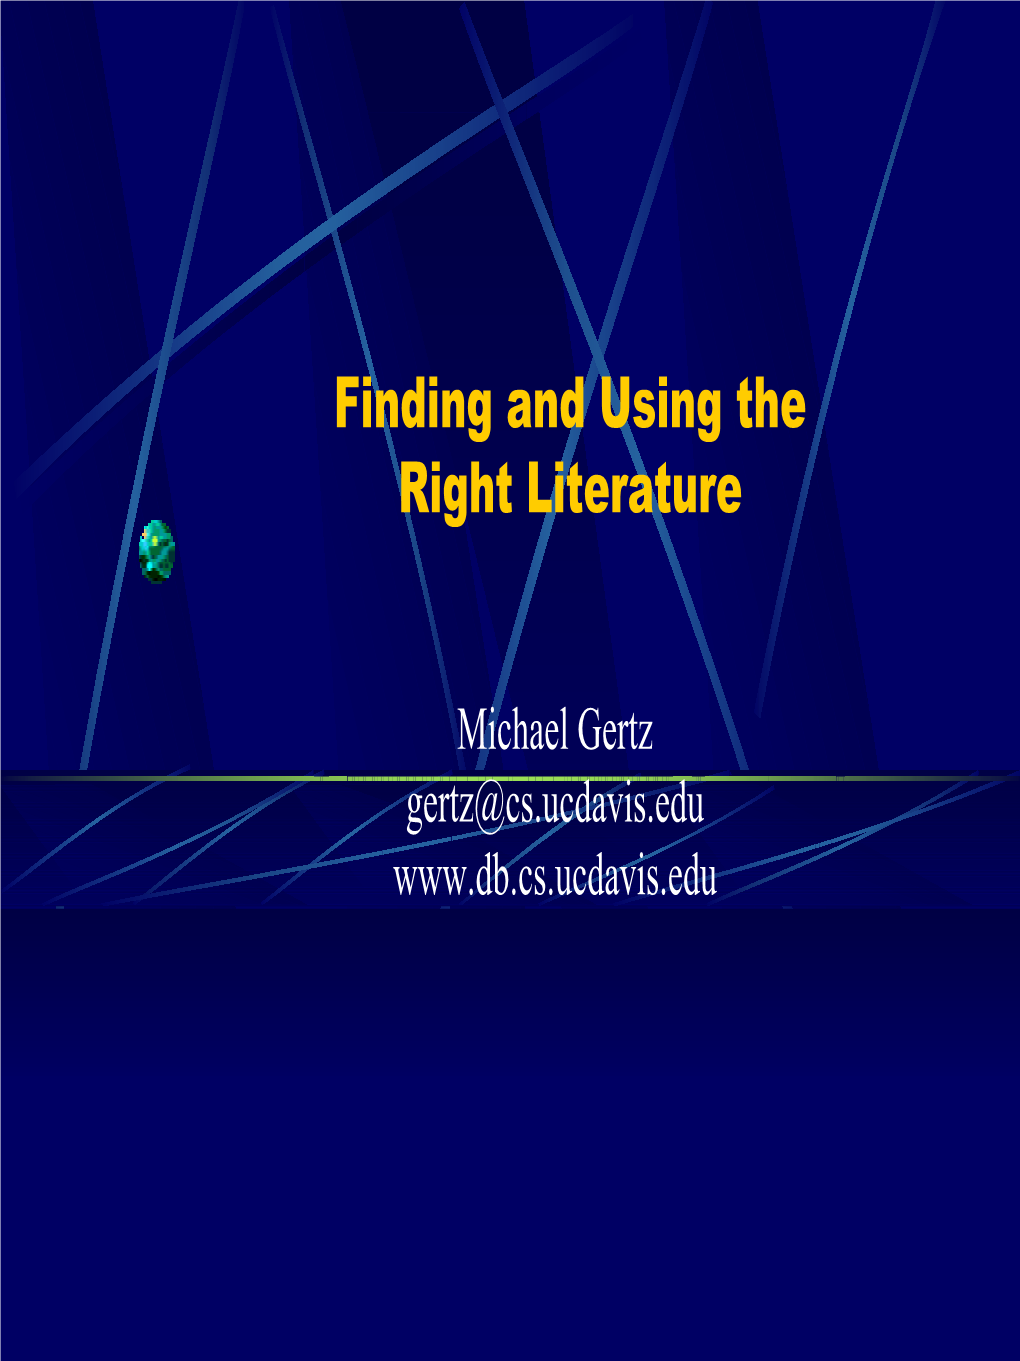 Finding and Using the Right Literature